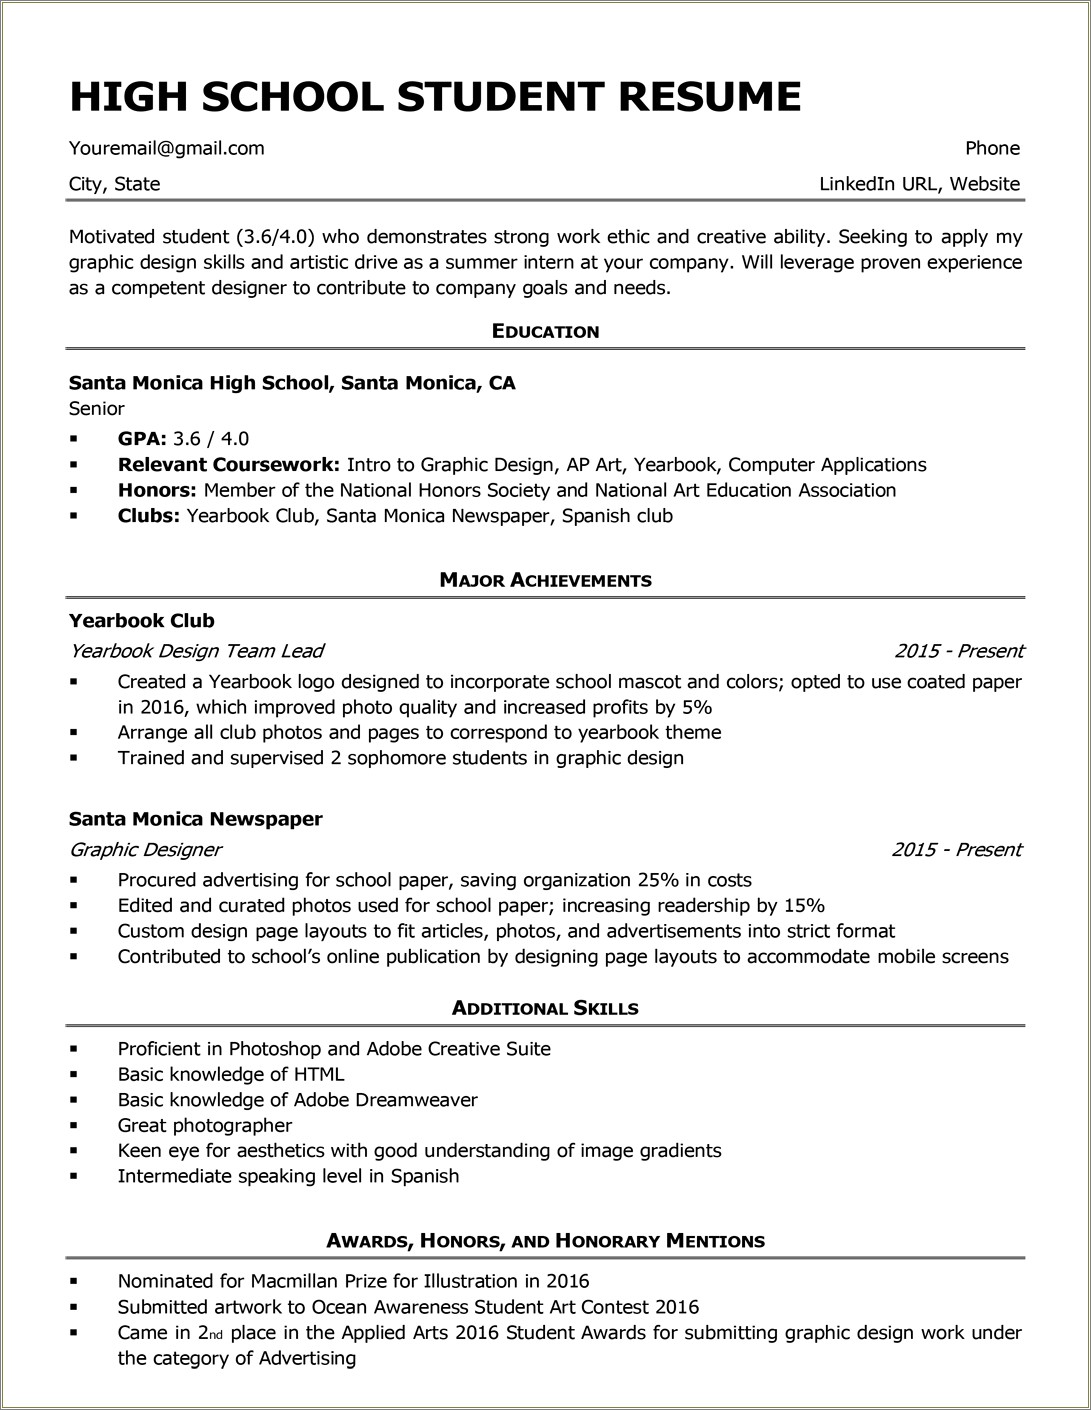 Examples Of Skills For Resume High School